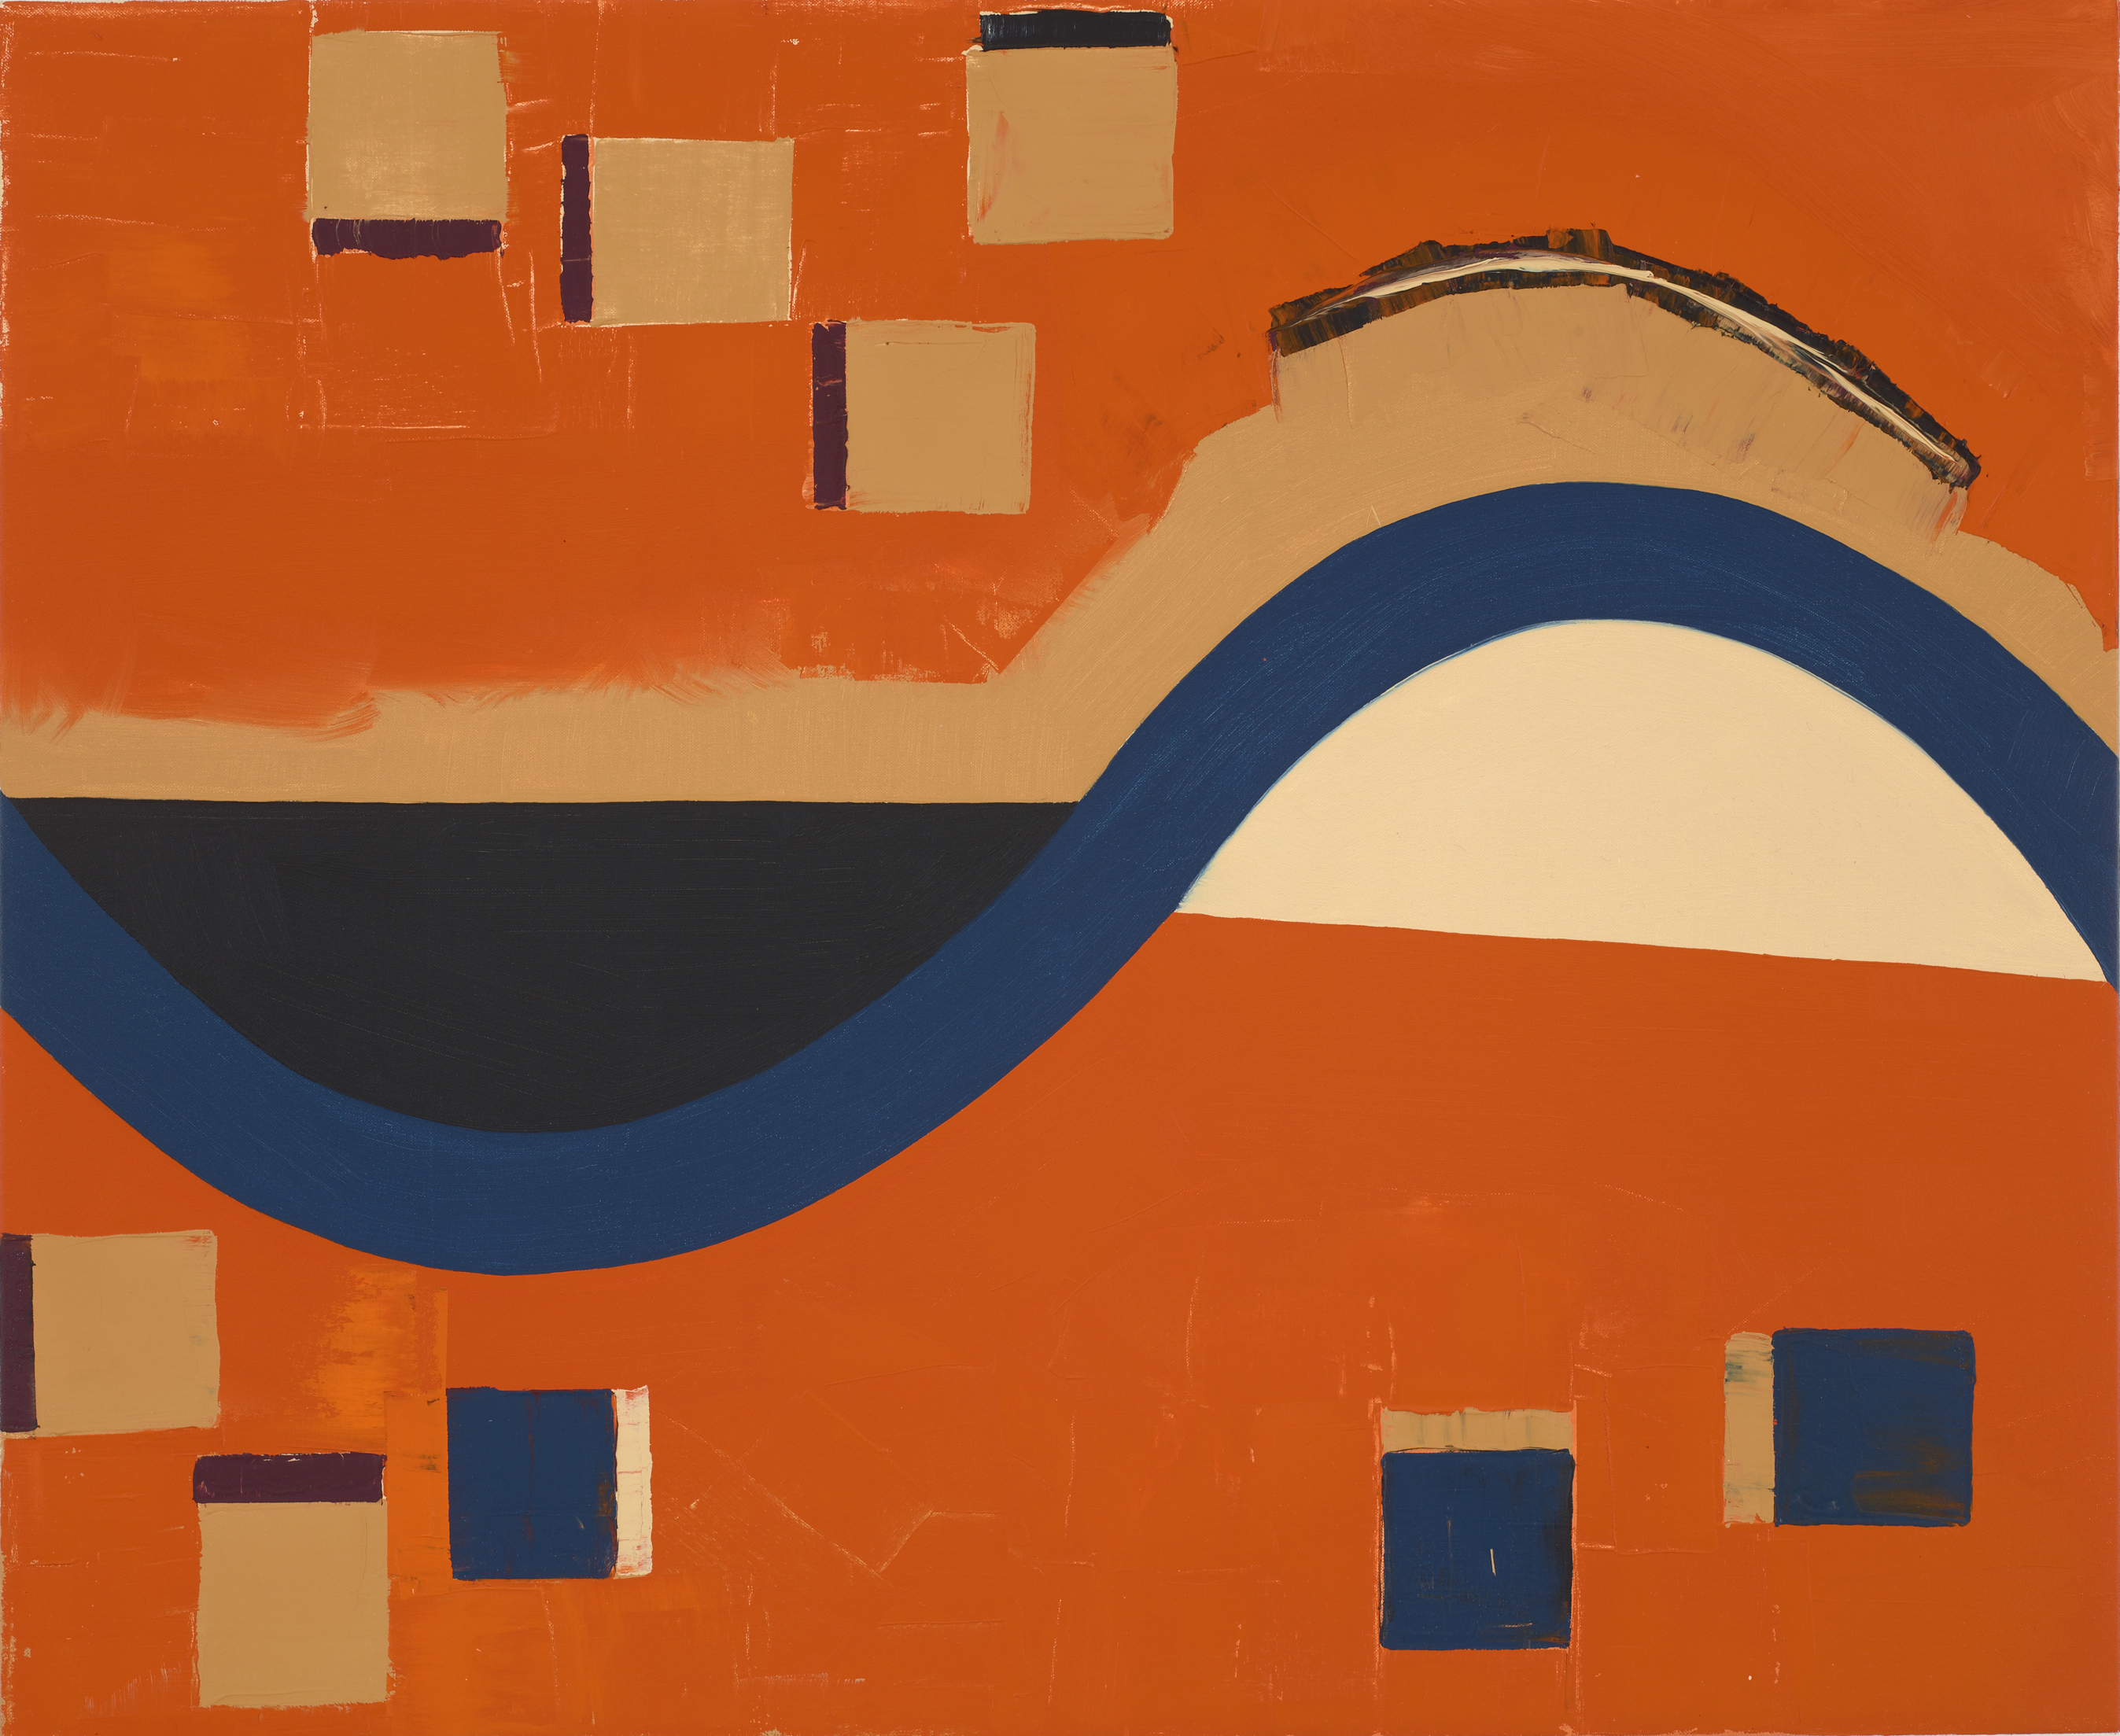 The Fist Wave, 1989-90, oil on canvas, 28 x 34 inches